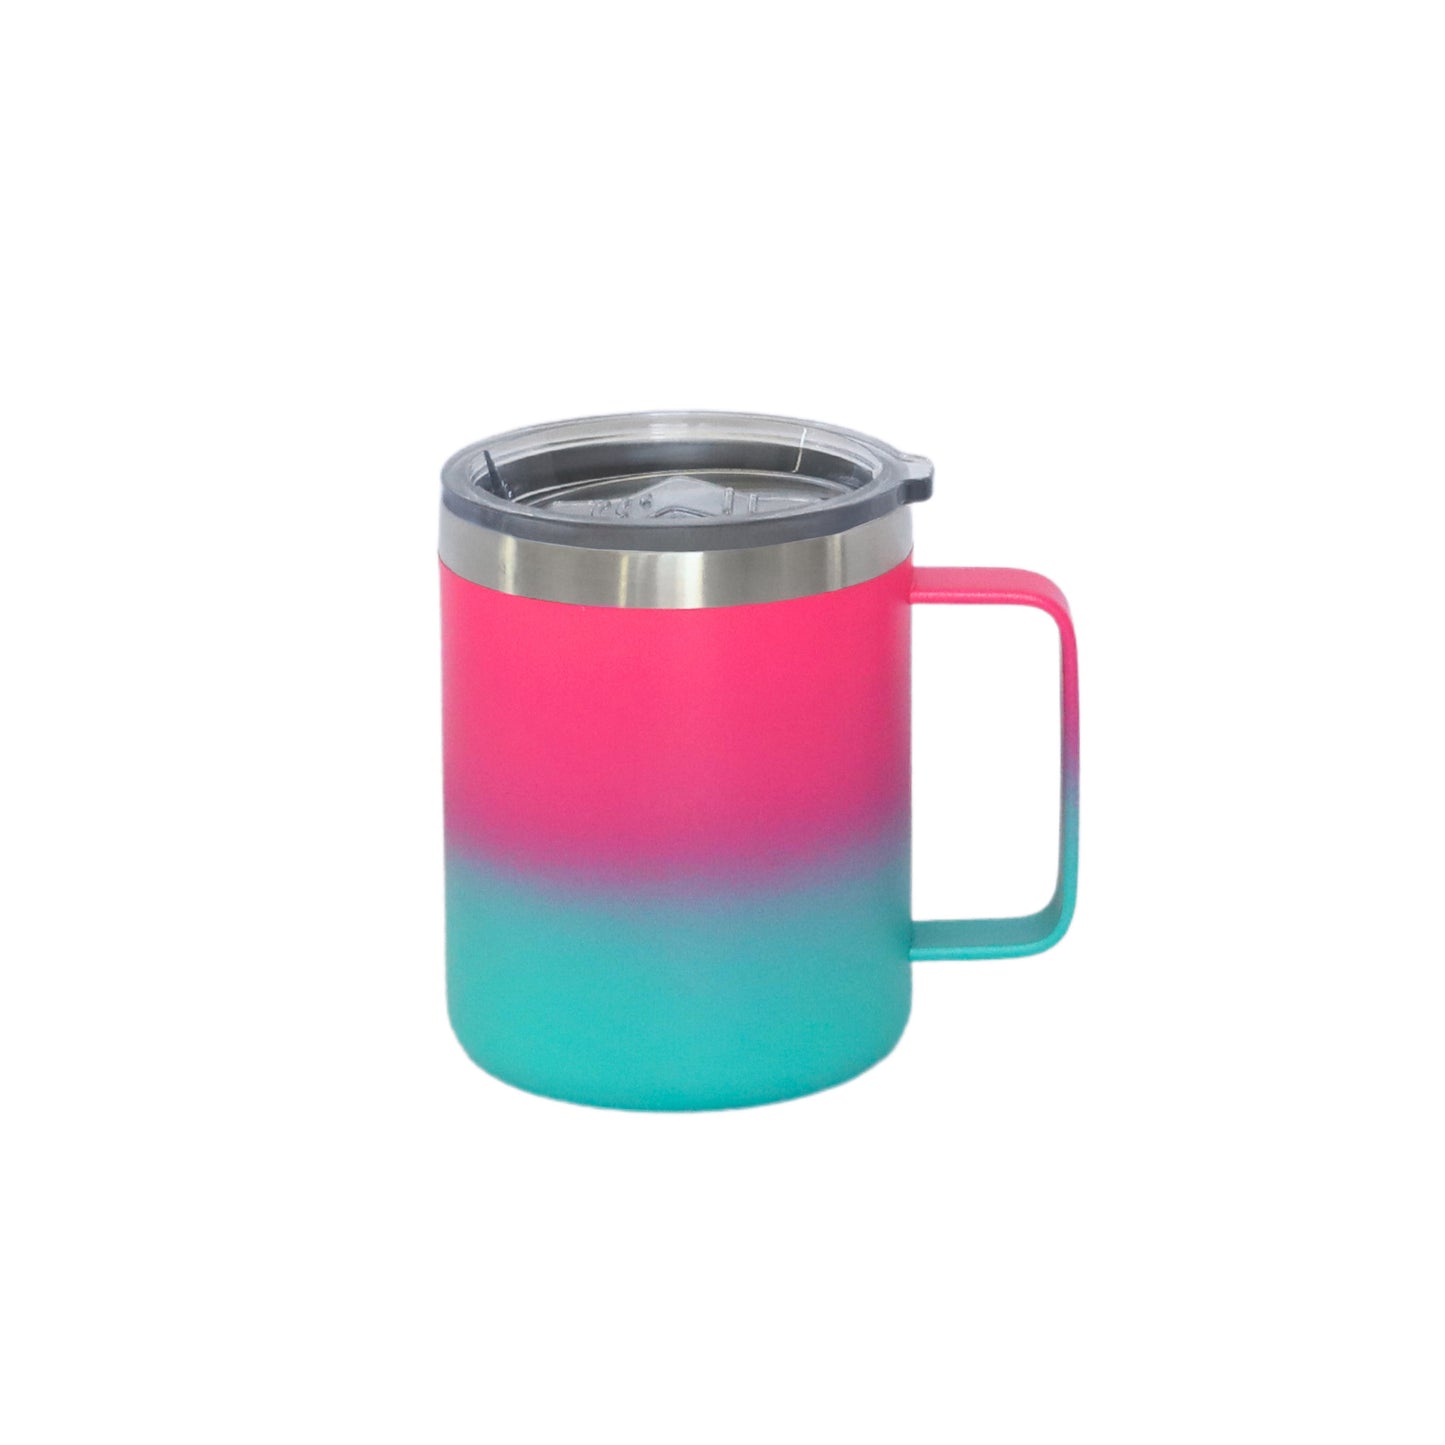 12 Oz Stainless Steel Travel Mug with Handle - Hot Pink & Blue